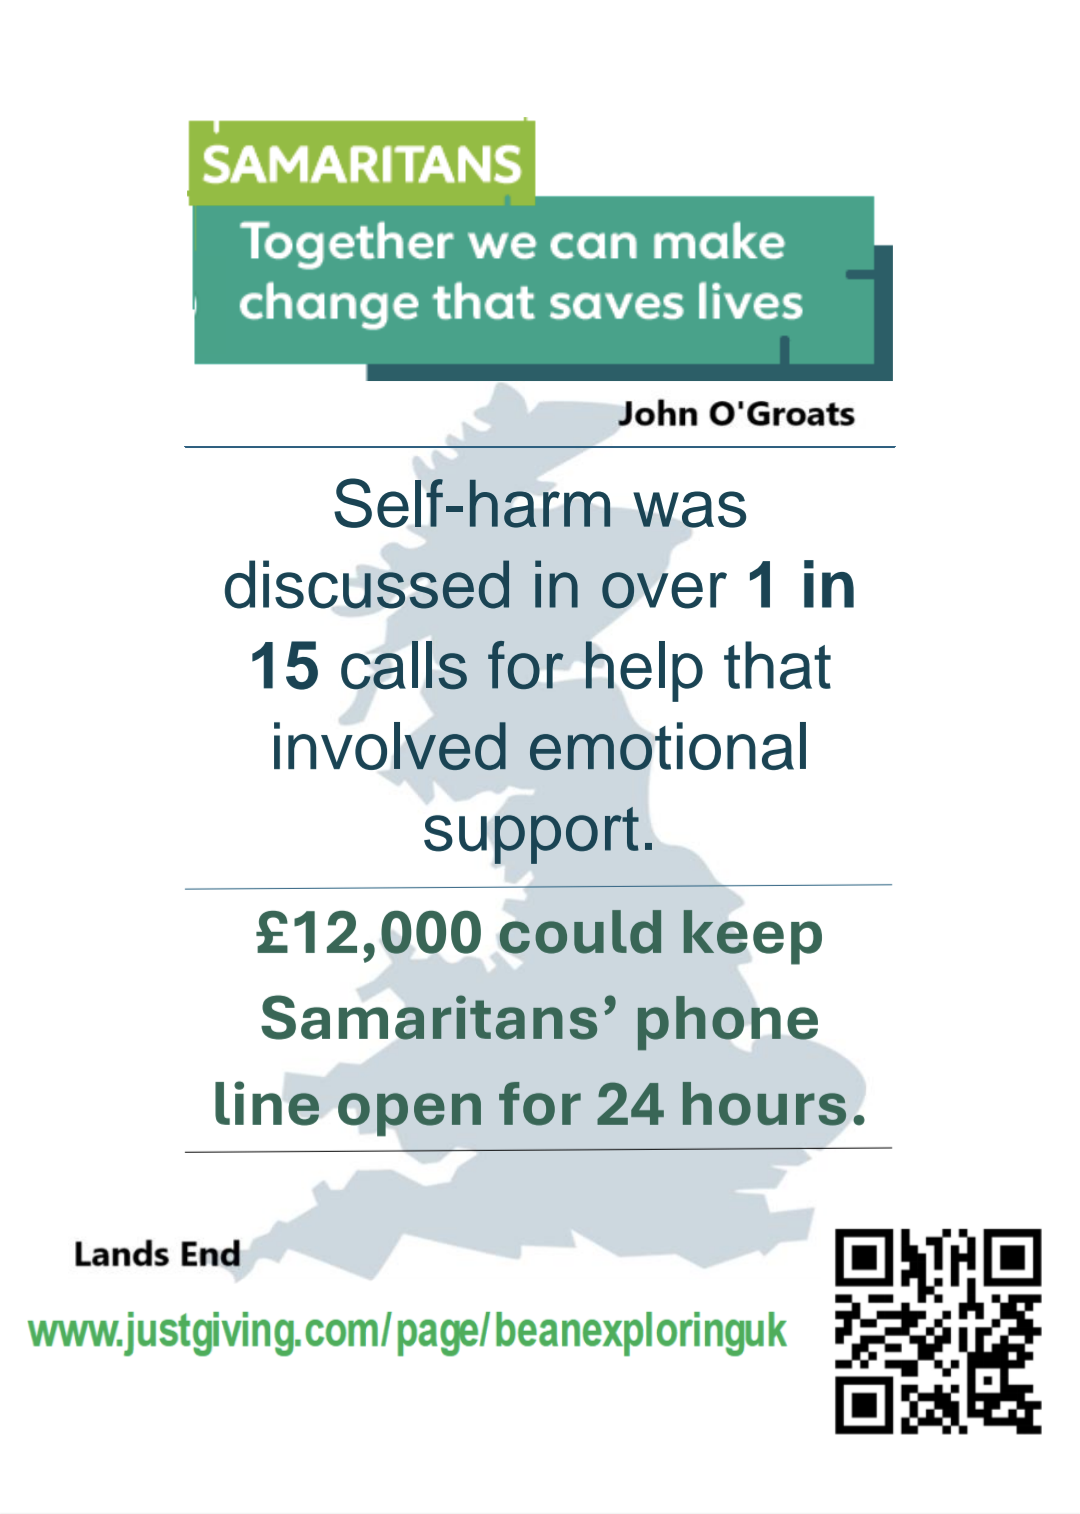 Understanding Self-Harm: Providing Support in Times of Crisis